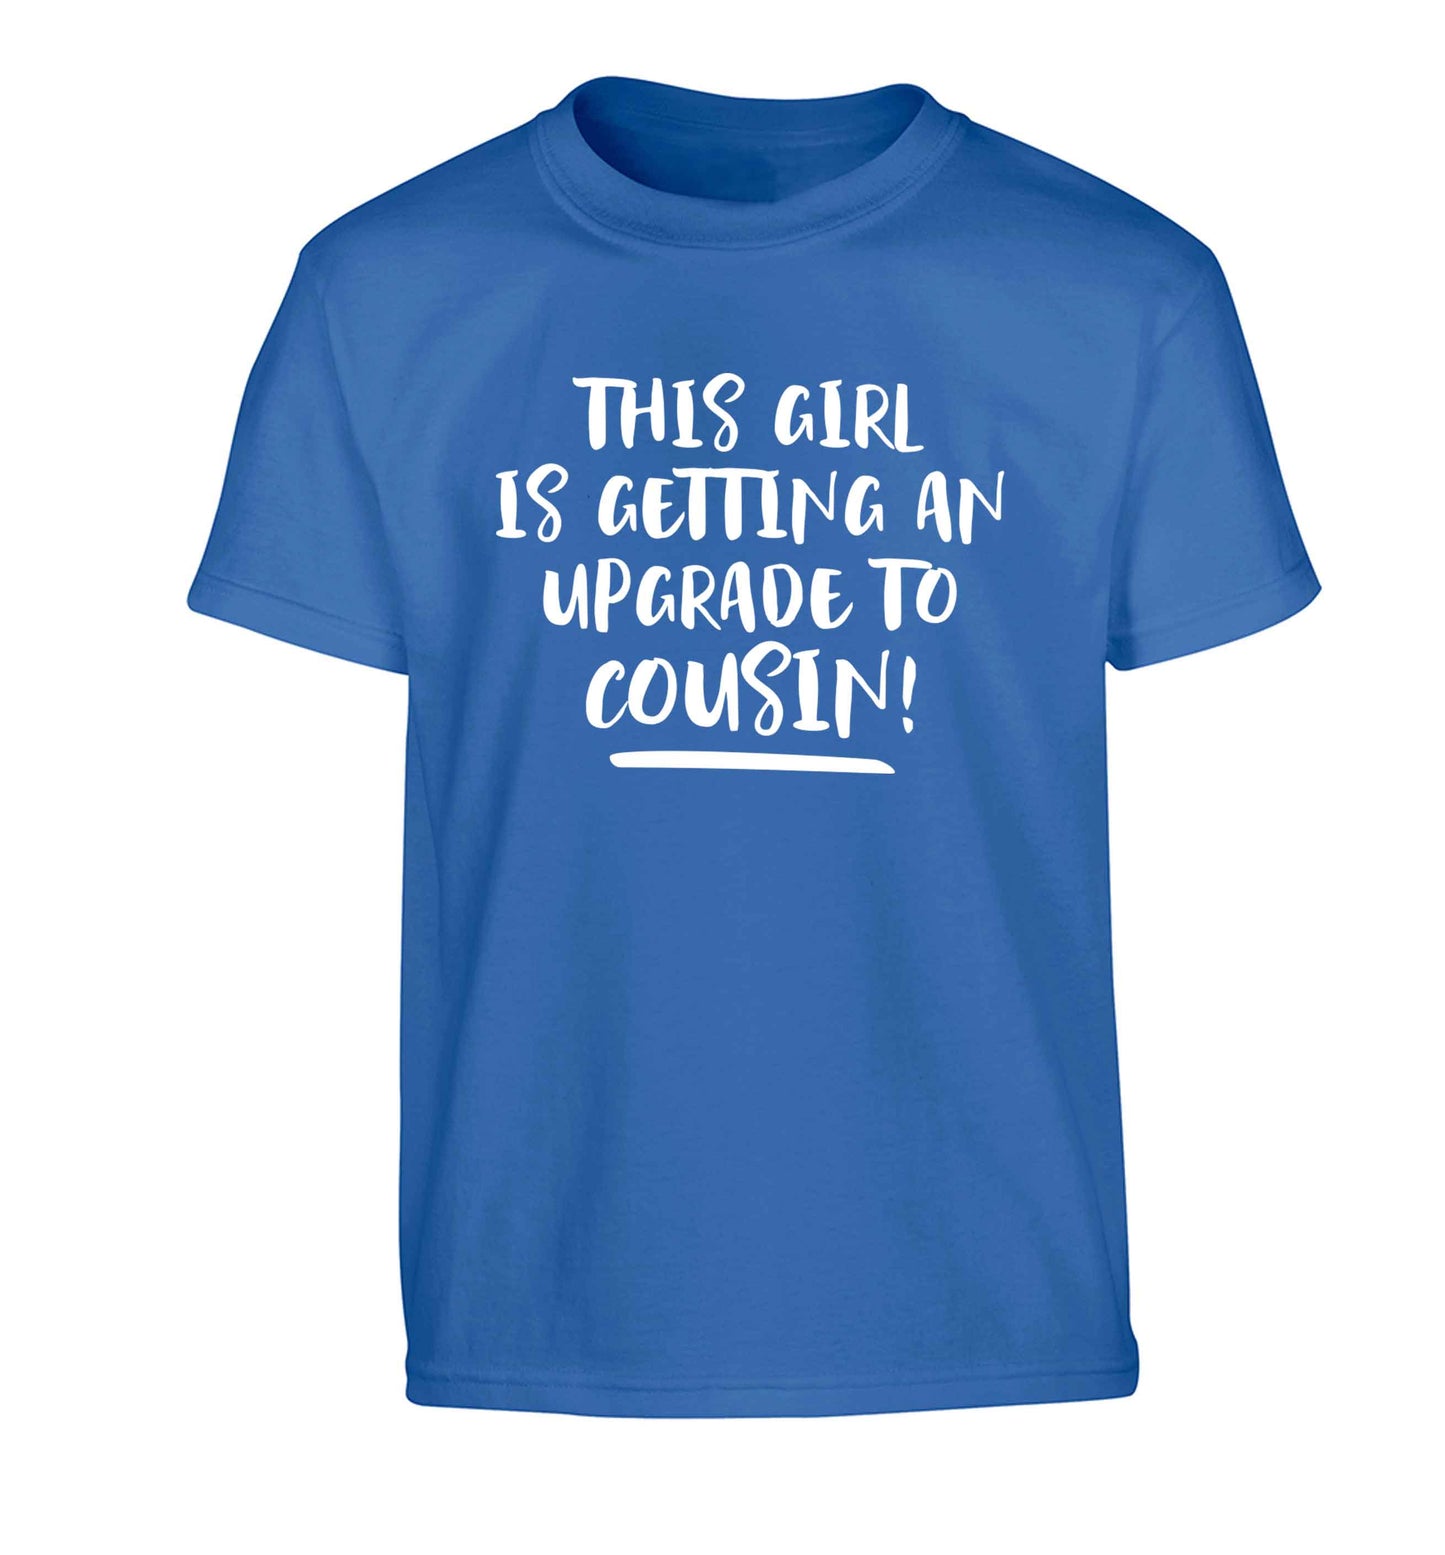 This girl is getting an upgrade to cousin! Children's blue Tshirt 12-13 Years